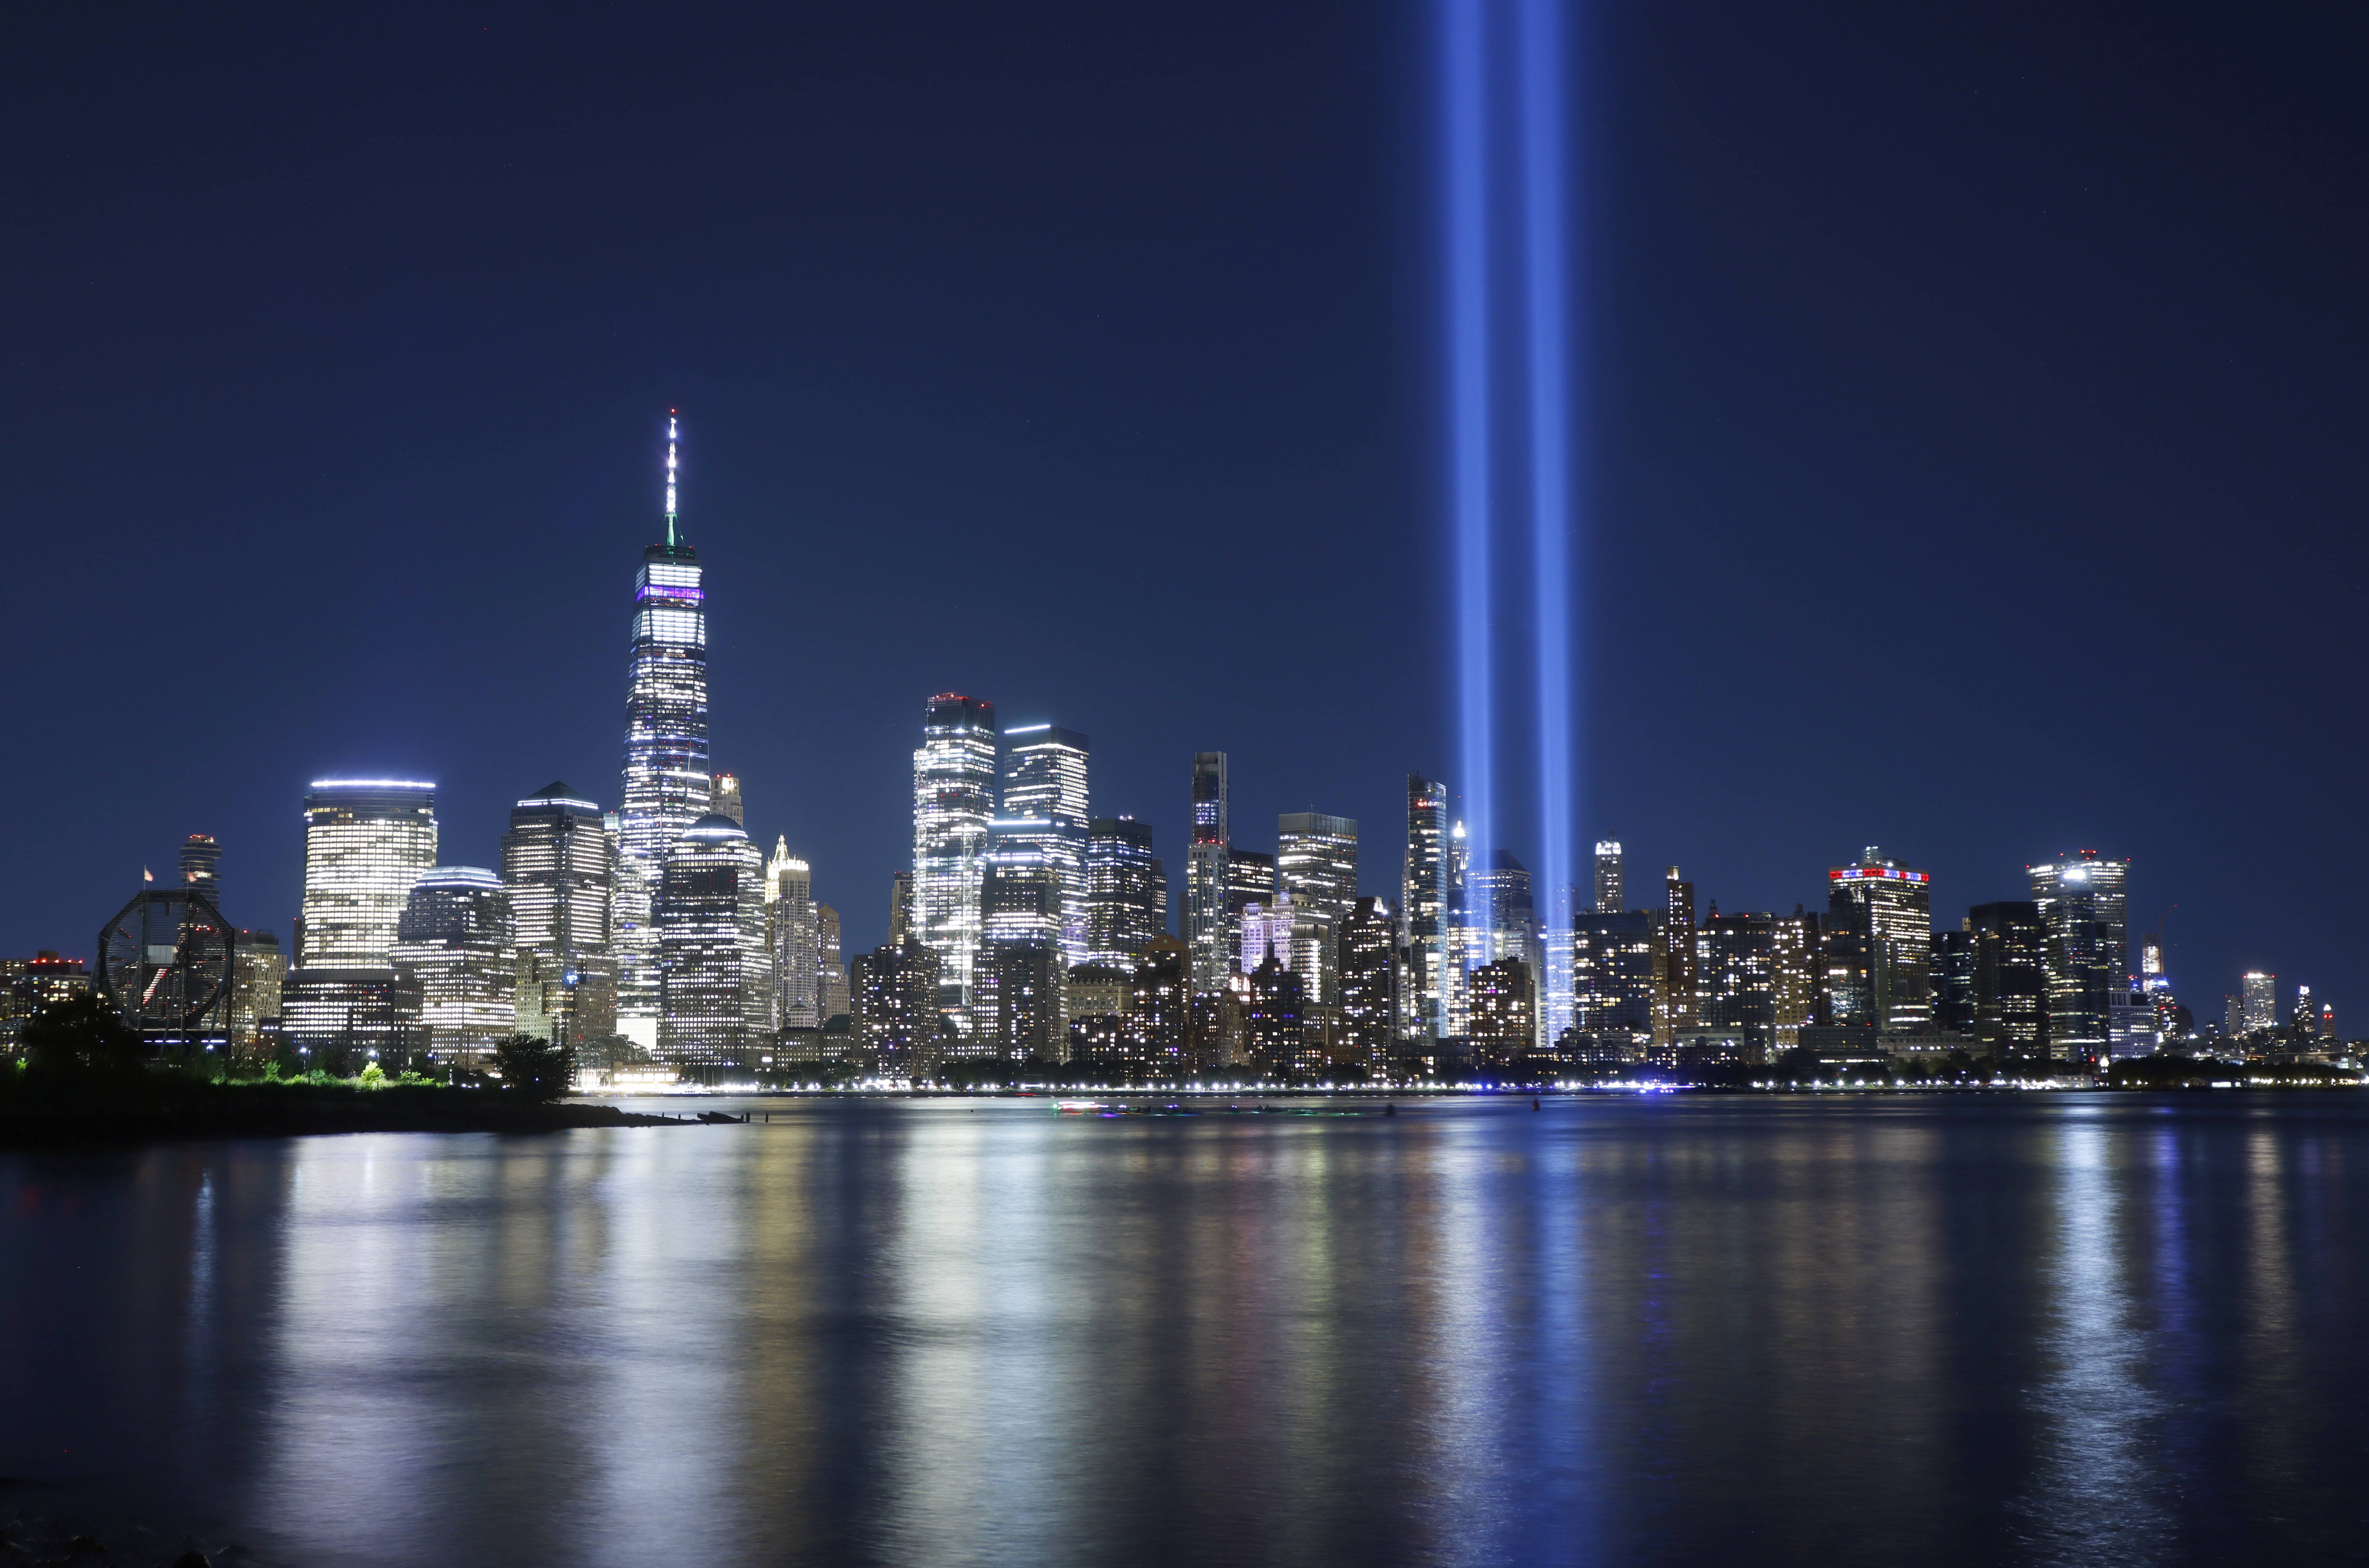 Our Round-Up of What To Watch in Honor of the 20th Anniversary of 9/11